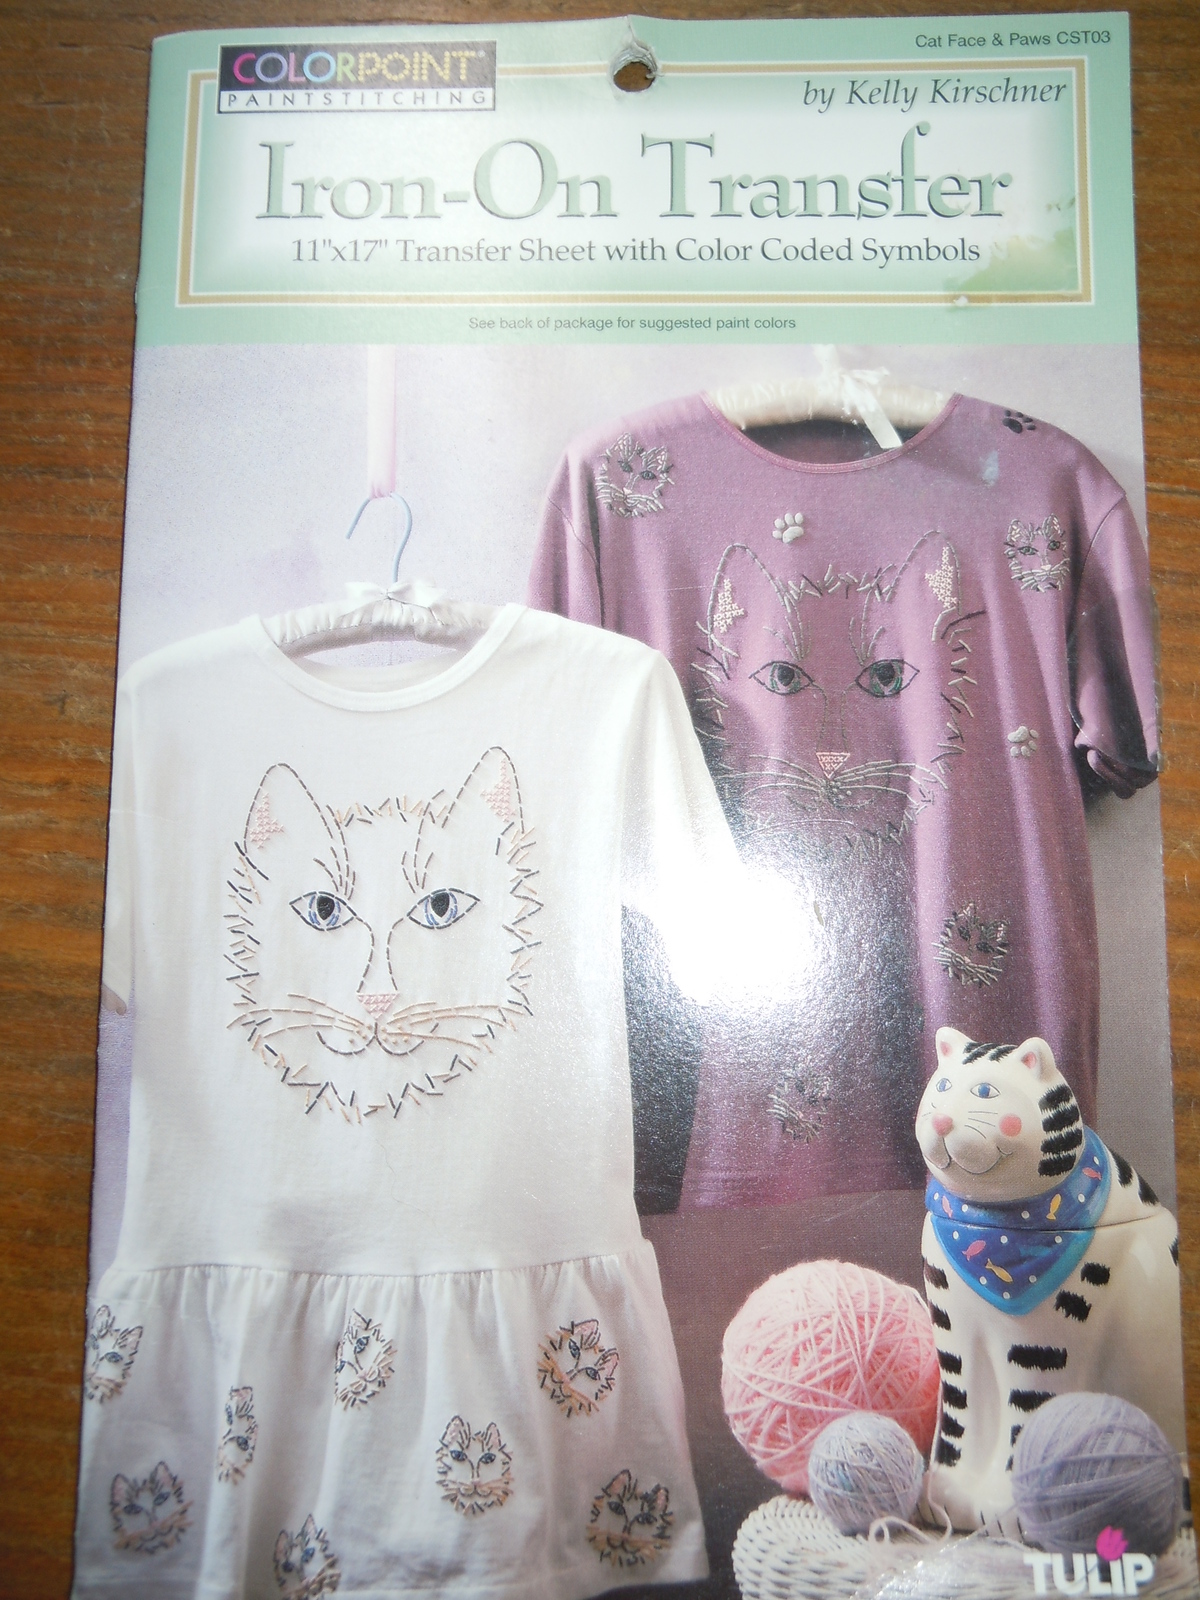 Colorpoint Cat Face & Paws Iron On Transfer by Kelly Kirshner New in Package - $4.99